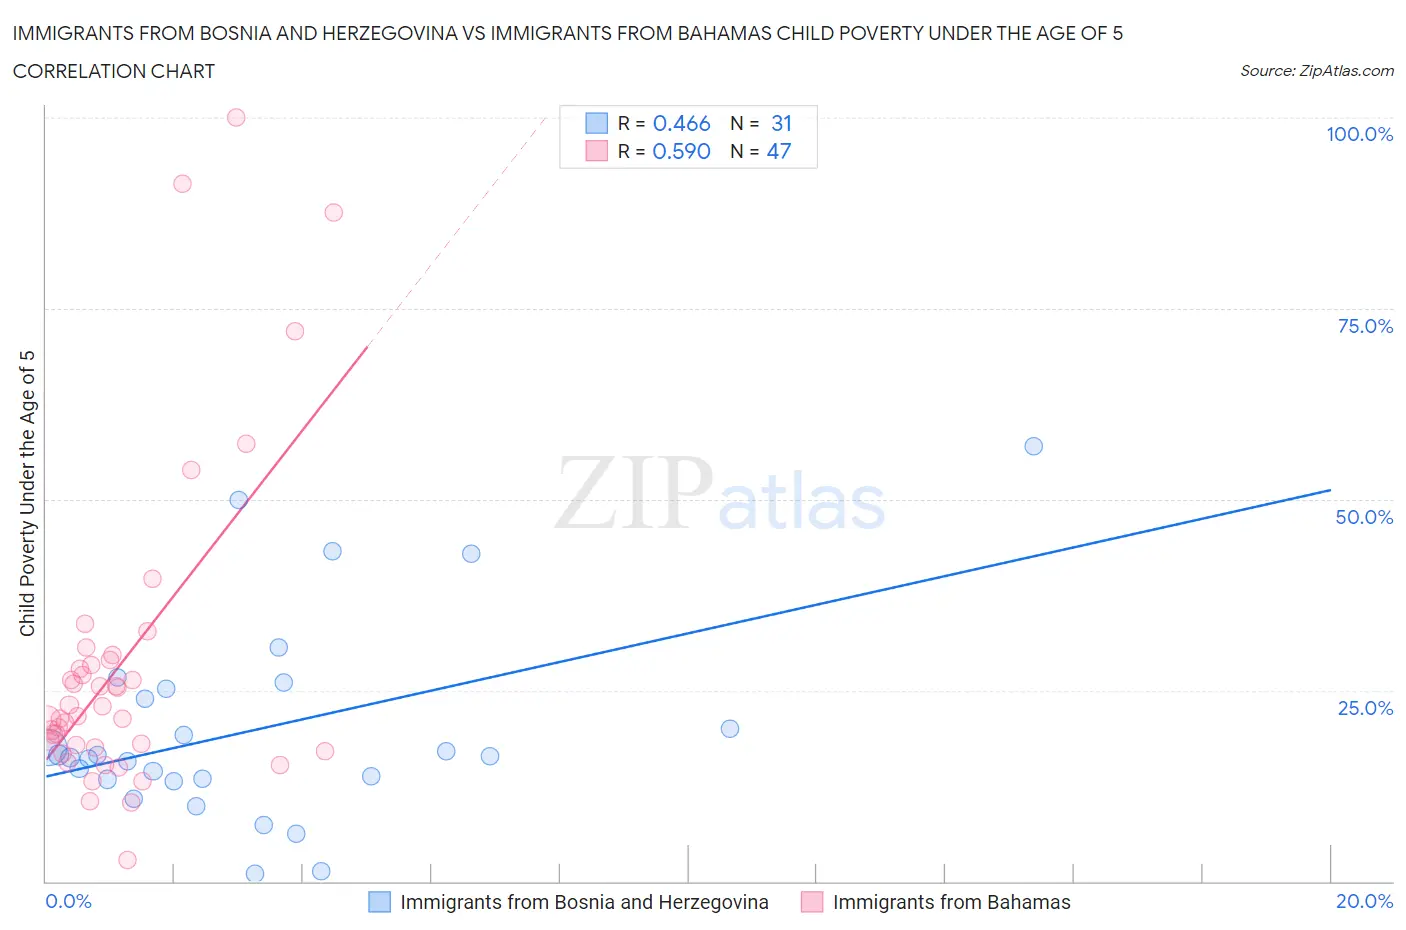 Immigrants from Bosnia and Herzegovina vs Immigrants from Bahamas Child Poverty Under the Age of 5